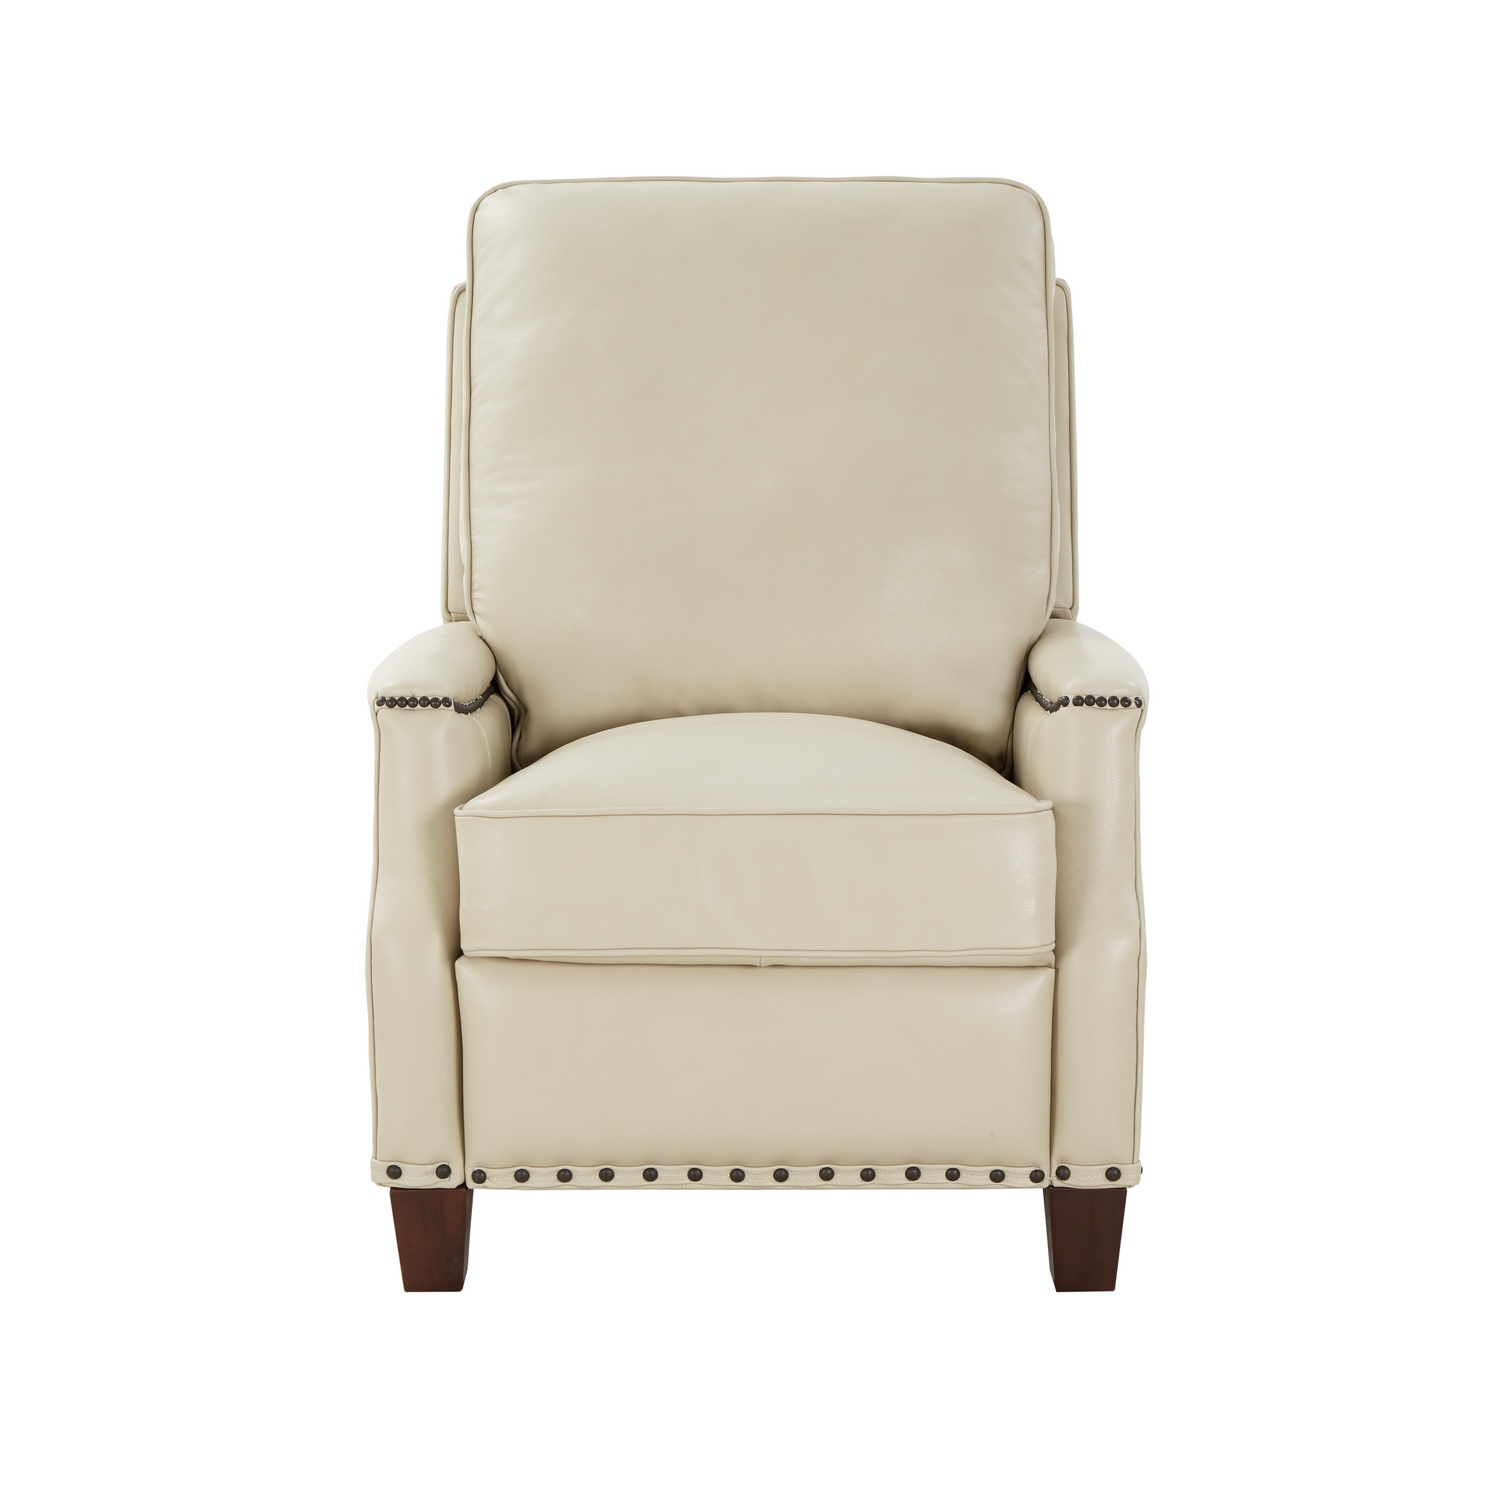 Barcalounger Ellis Power Recliner Chair - Barone Parchment/All Leather